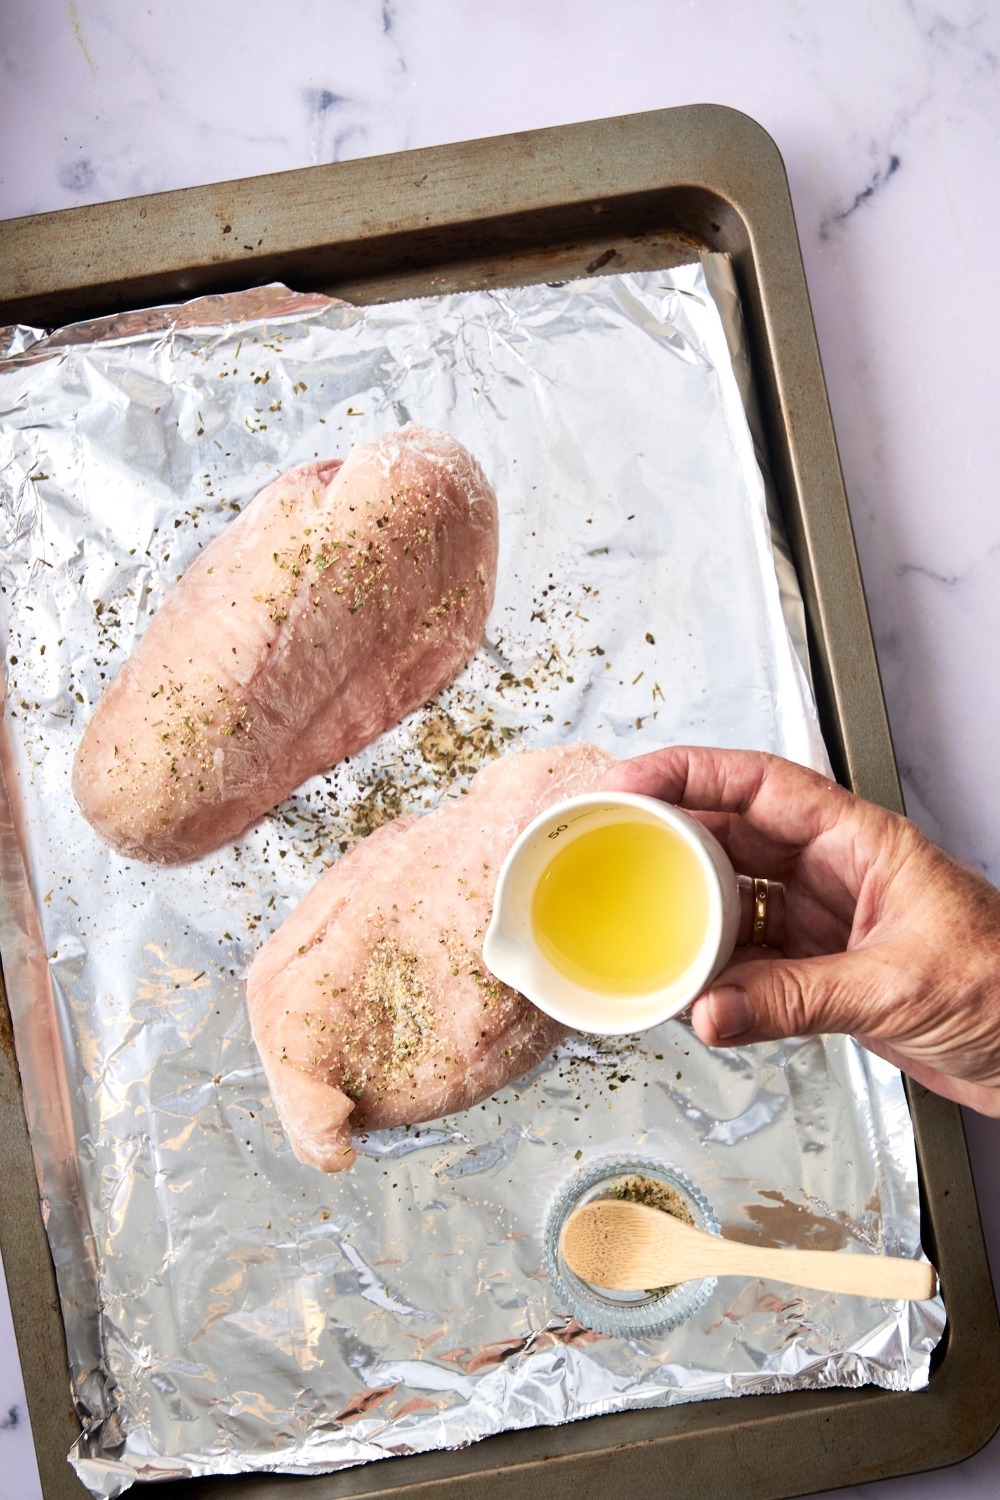 Someone pours melted butter over two chicken breasts on a foil lined baking tray.